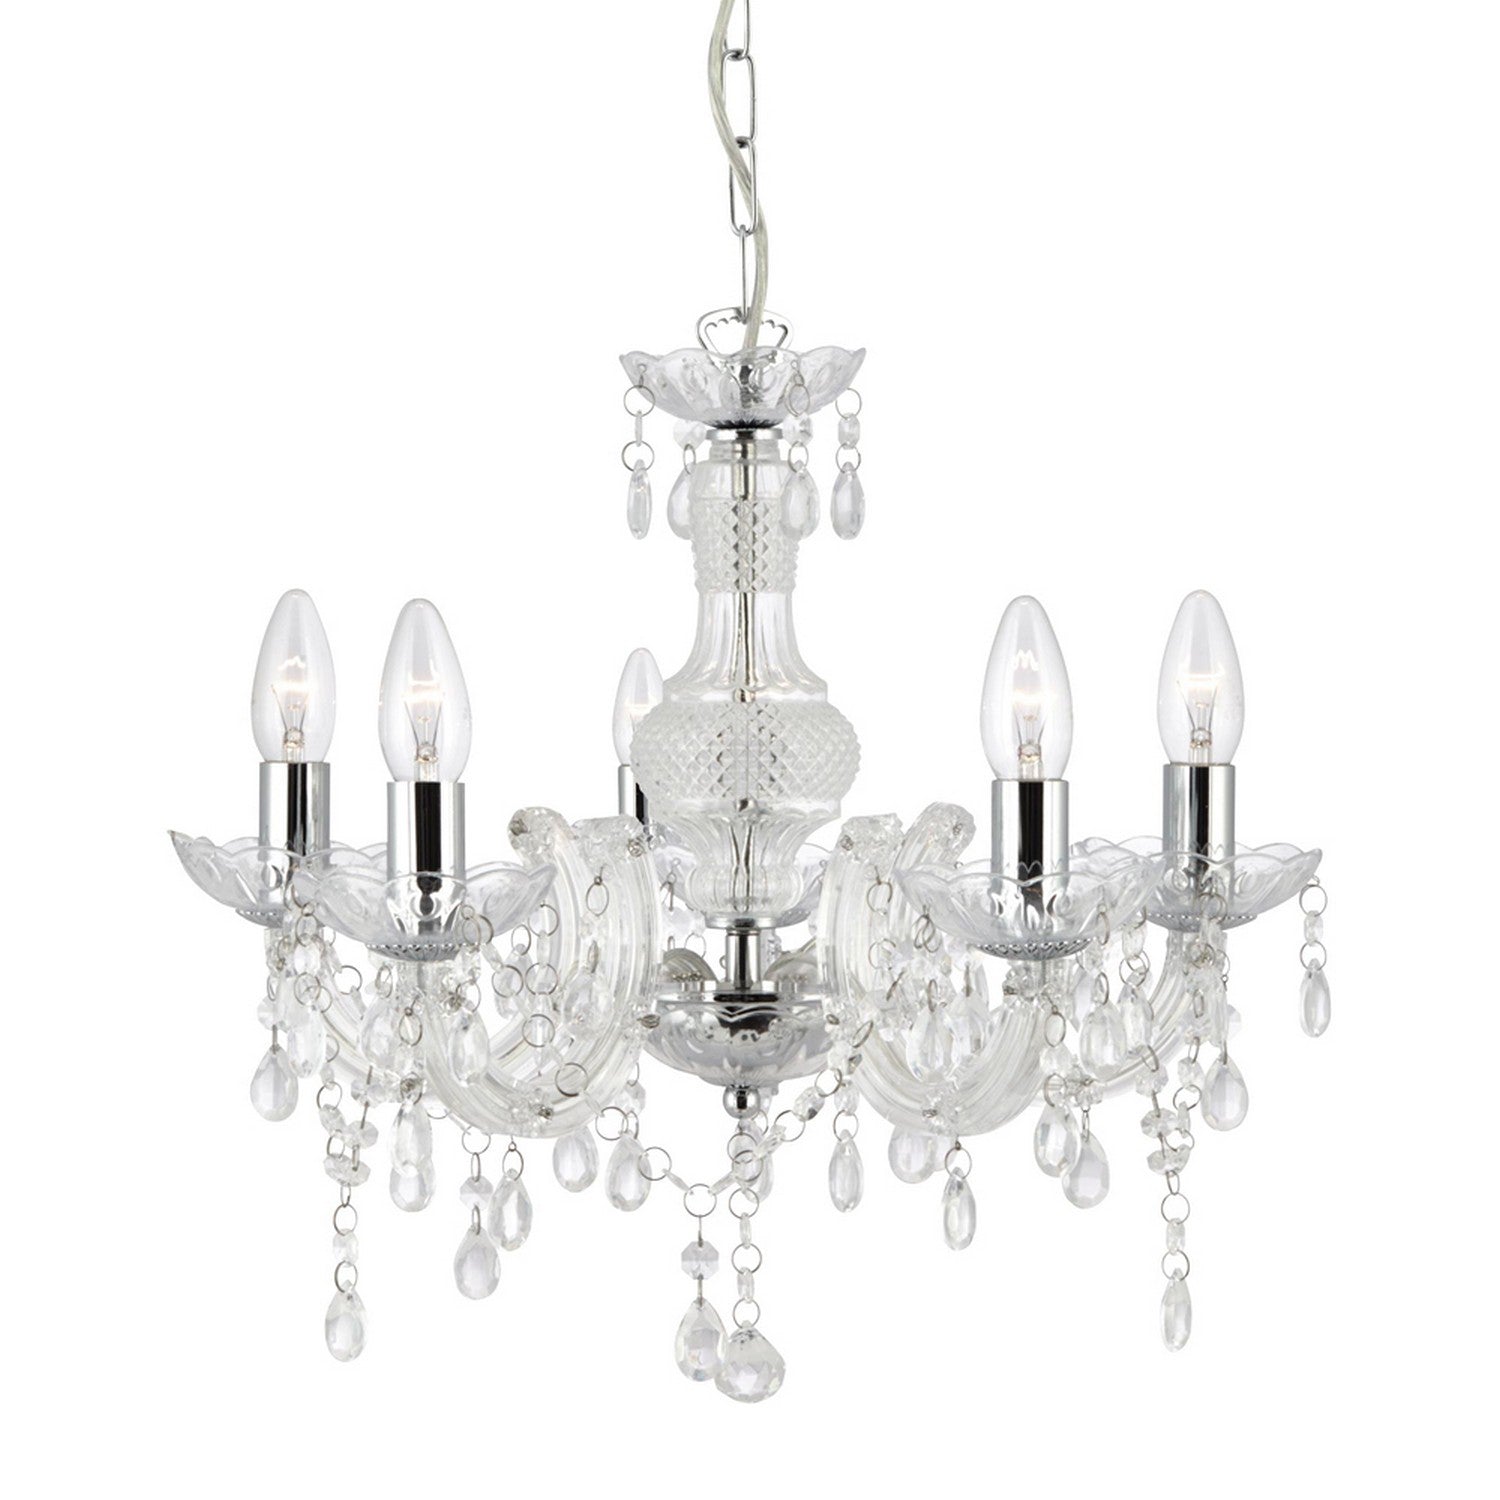 5 Light Marie Therese Style Chandelier With Clear Acrylic Droplets